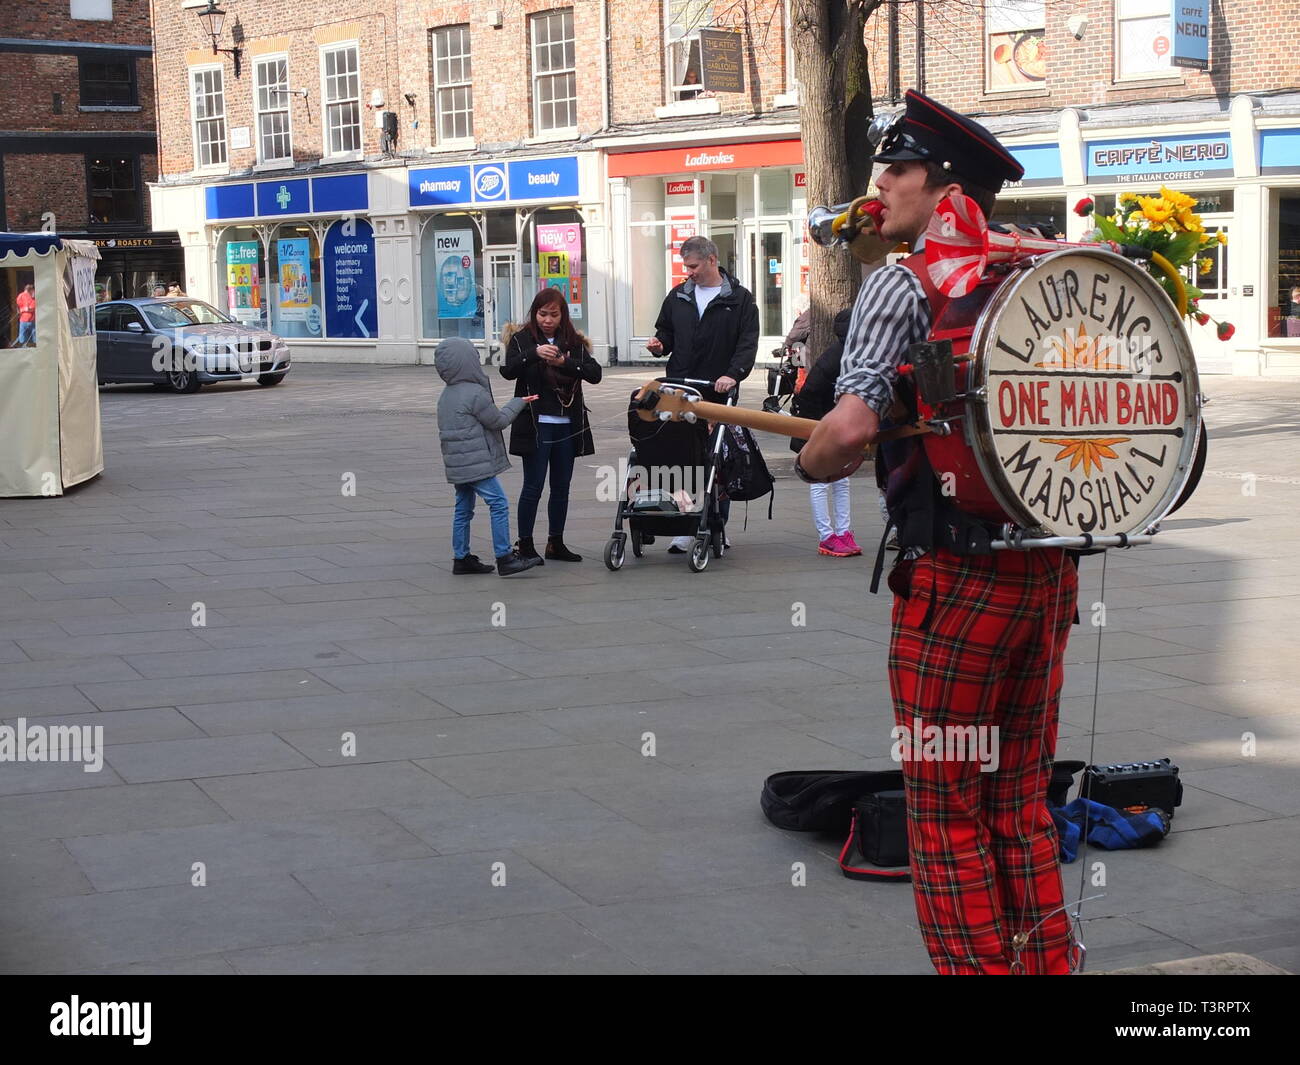 One man band performer Laurence Marshall performing in Kings Square, York, UK Stock Photo